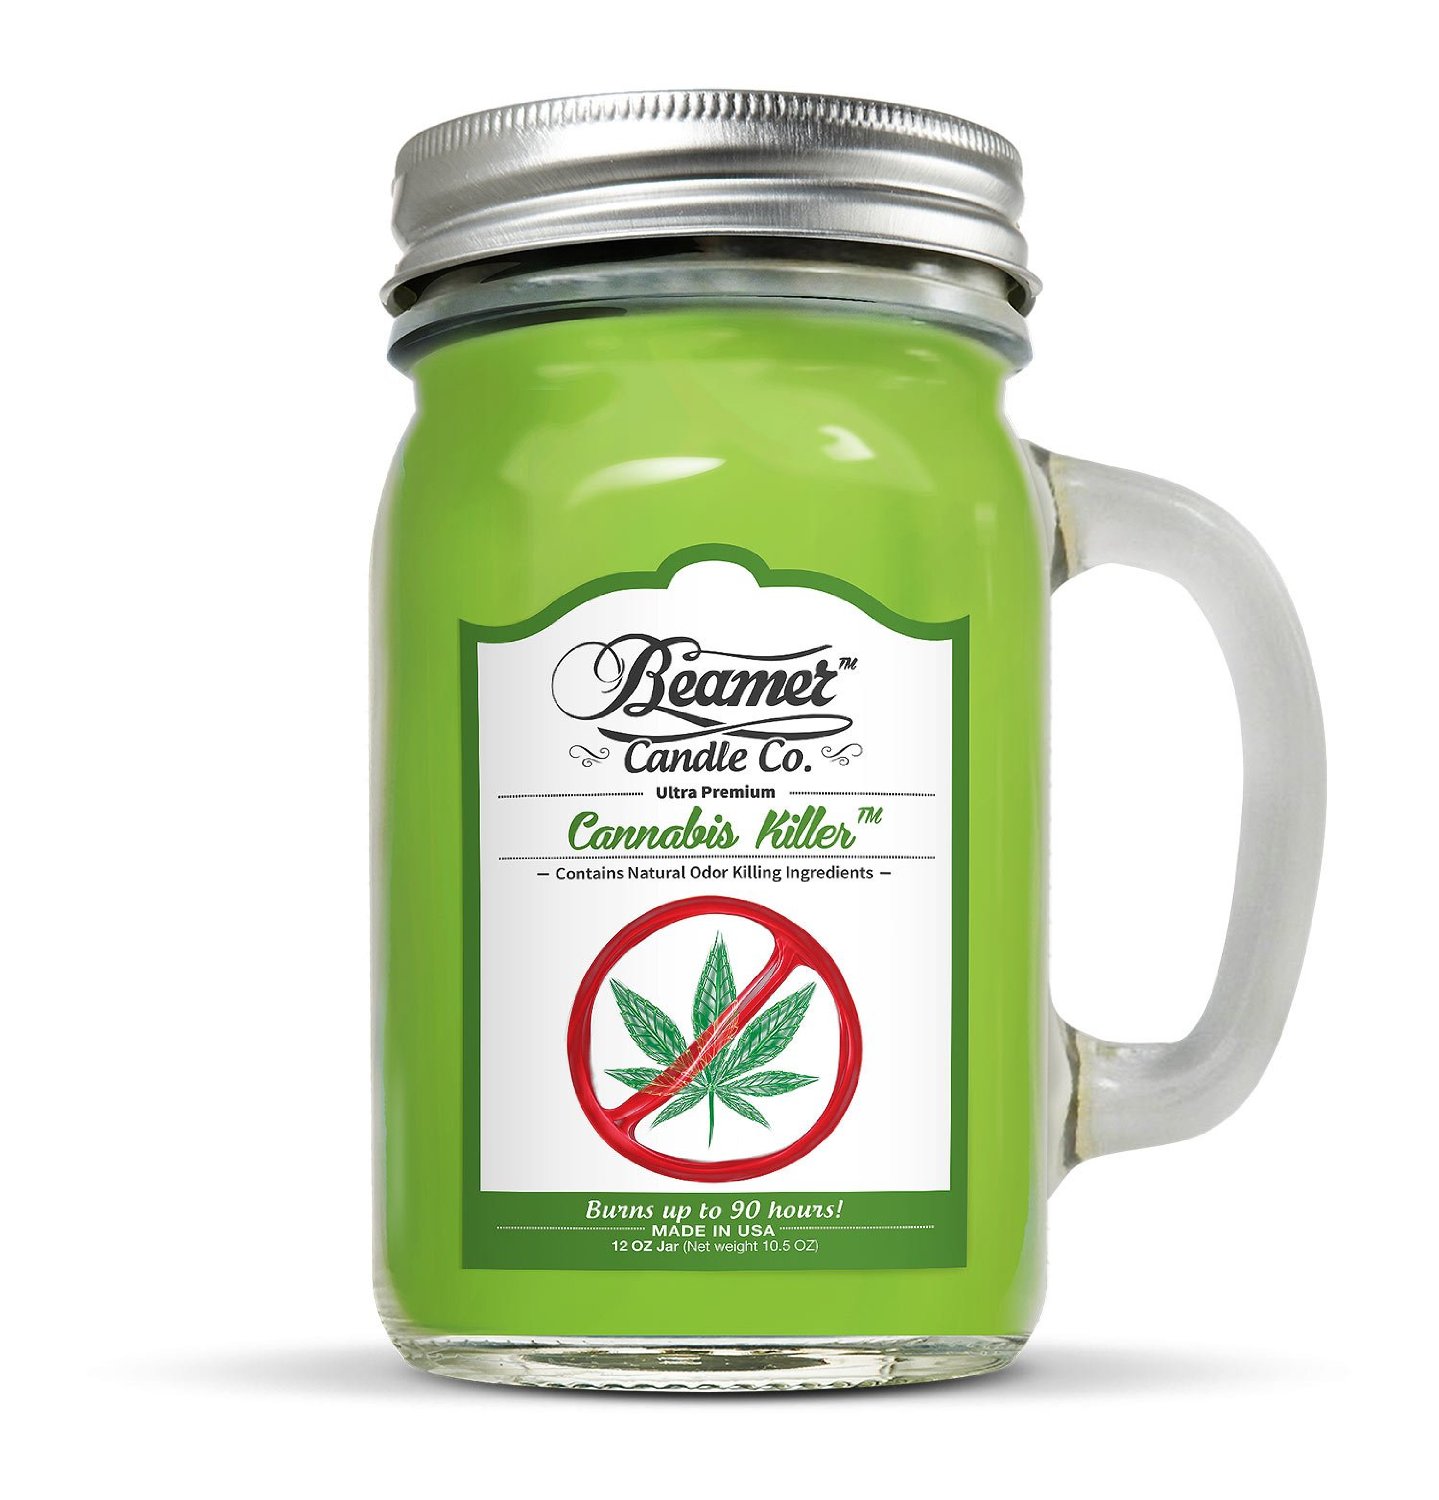 Cannabis Killer Scented Candle